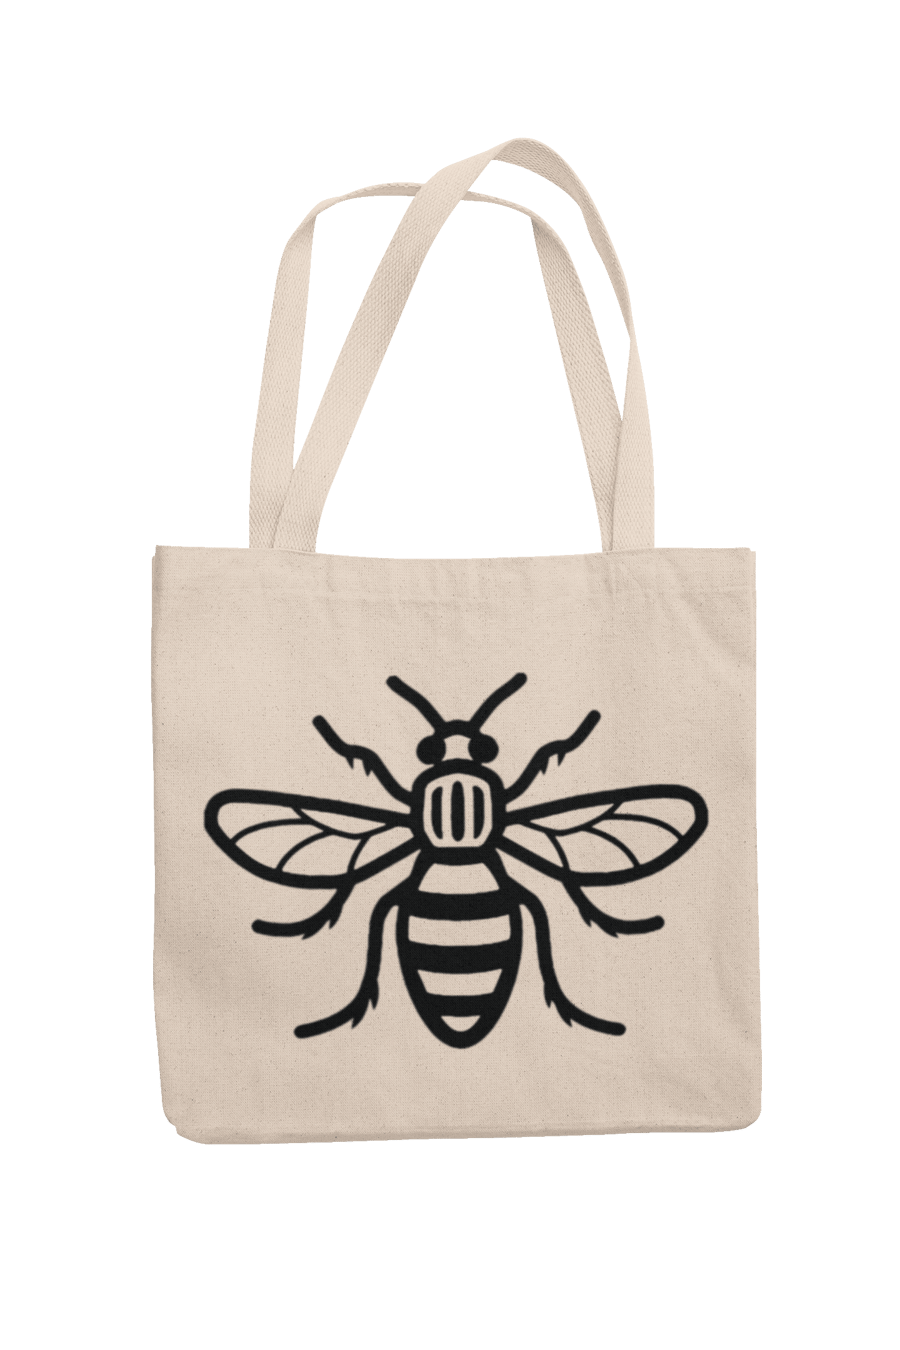 Manchester Bee Tote Bag - Plain Bee